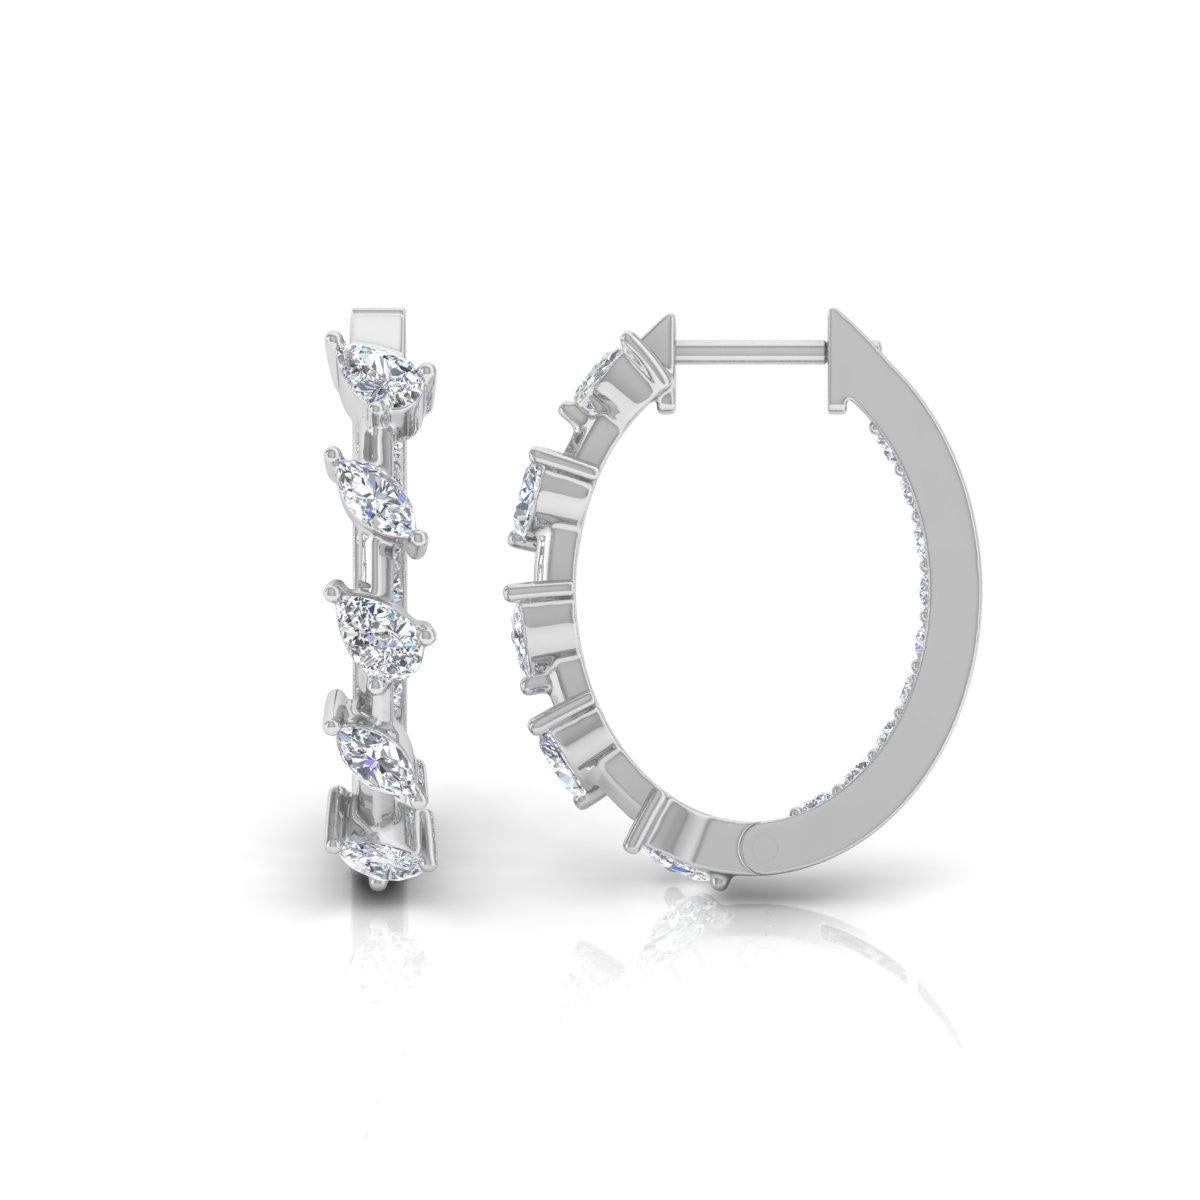 1.18 Carat Diamond Pave Huggies Hoop Earrings Solid 10k White Gold Fine Jewelry For Sale 2